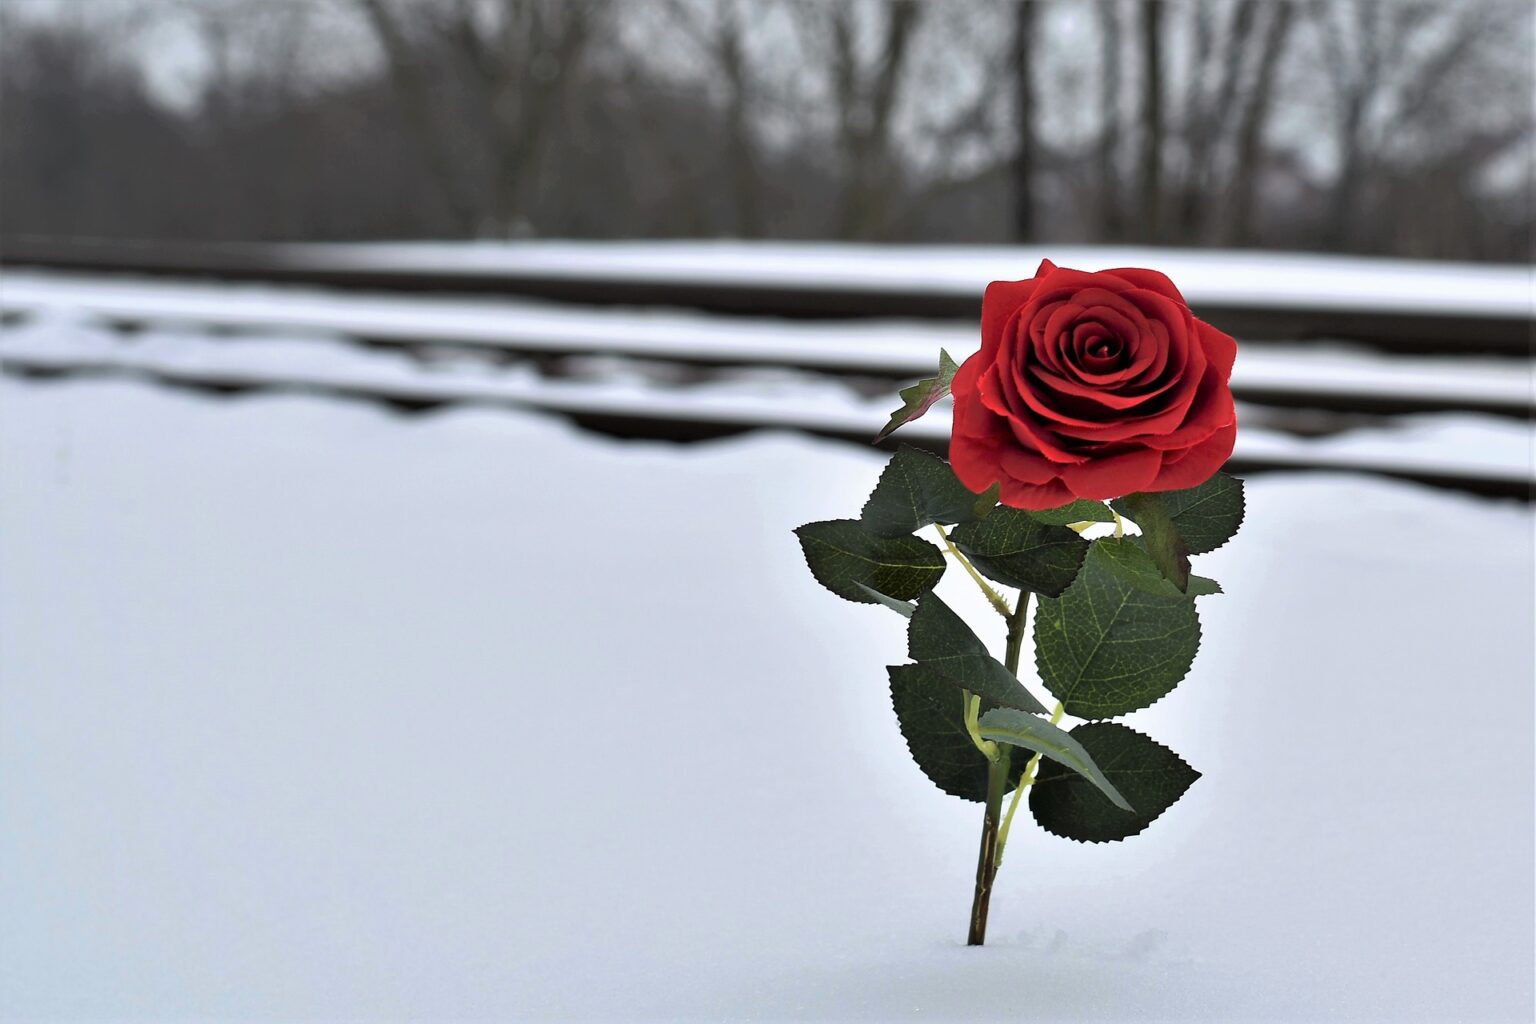 A red rose in snow signifies suicide prevention awareness efforts.